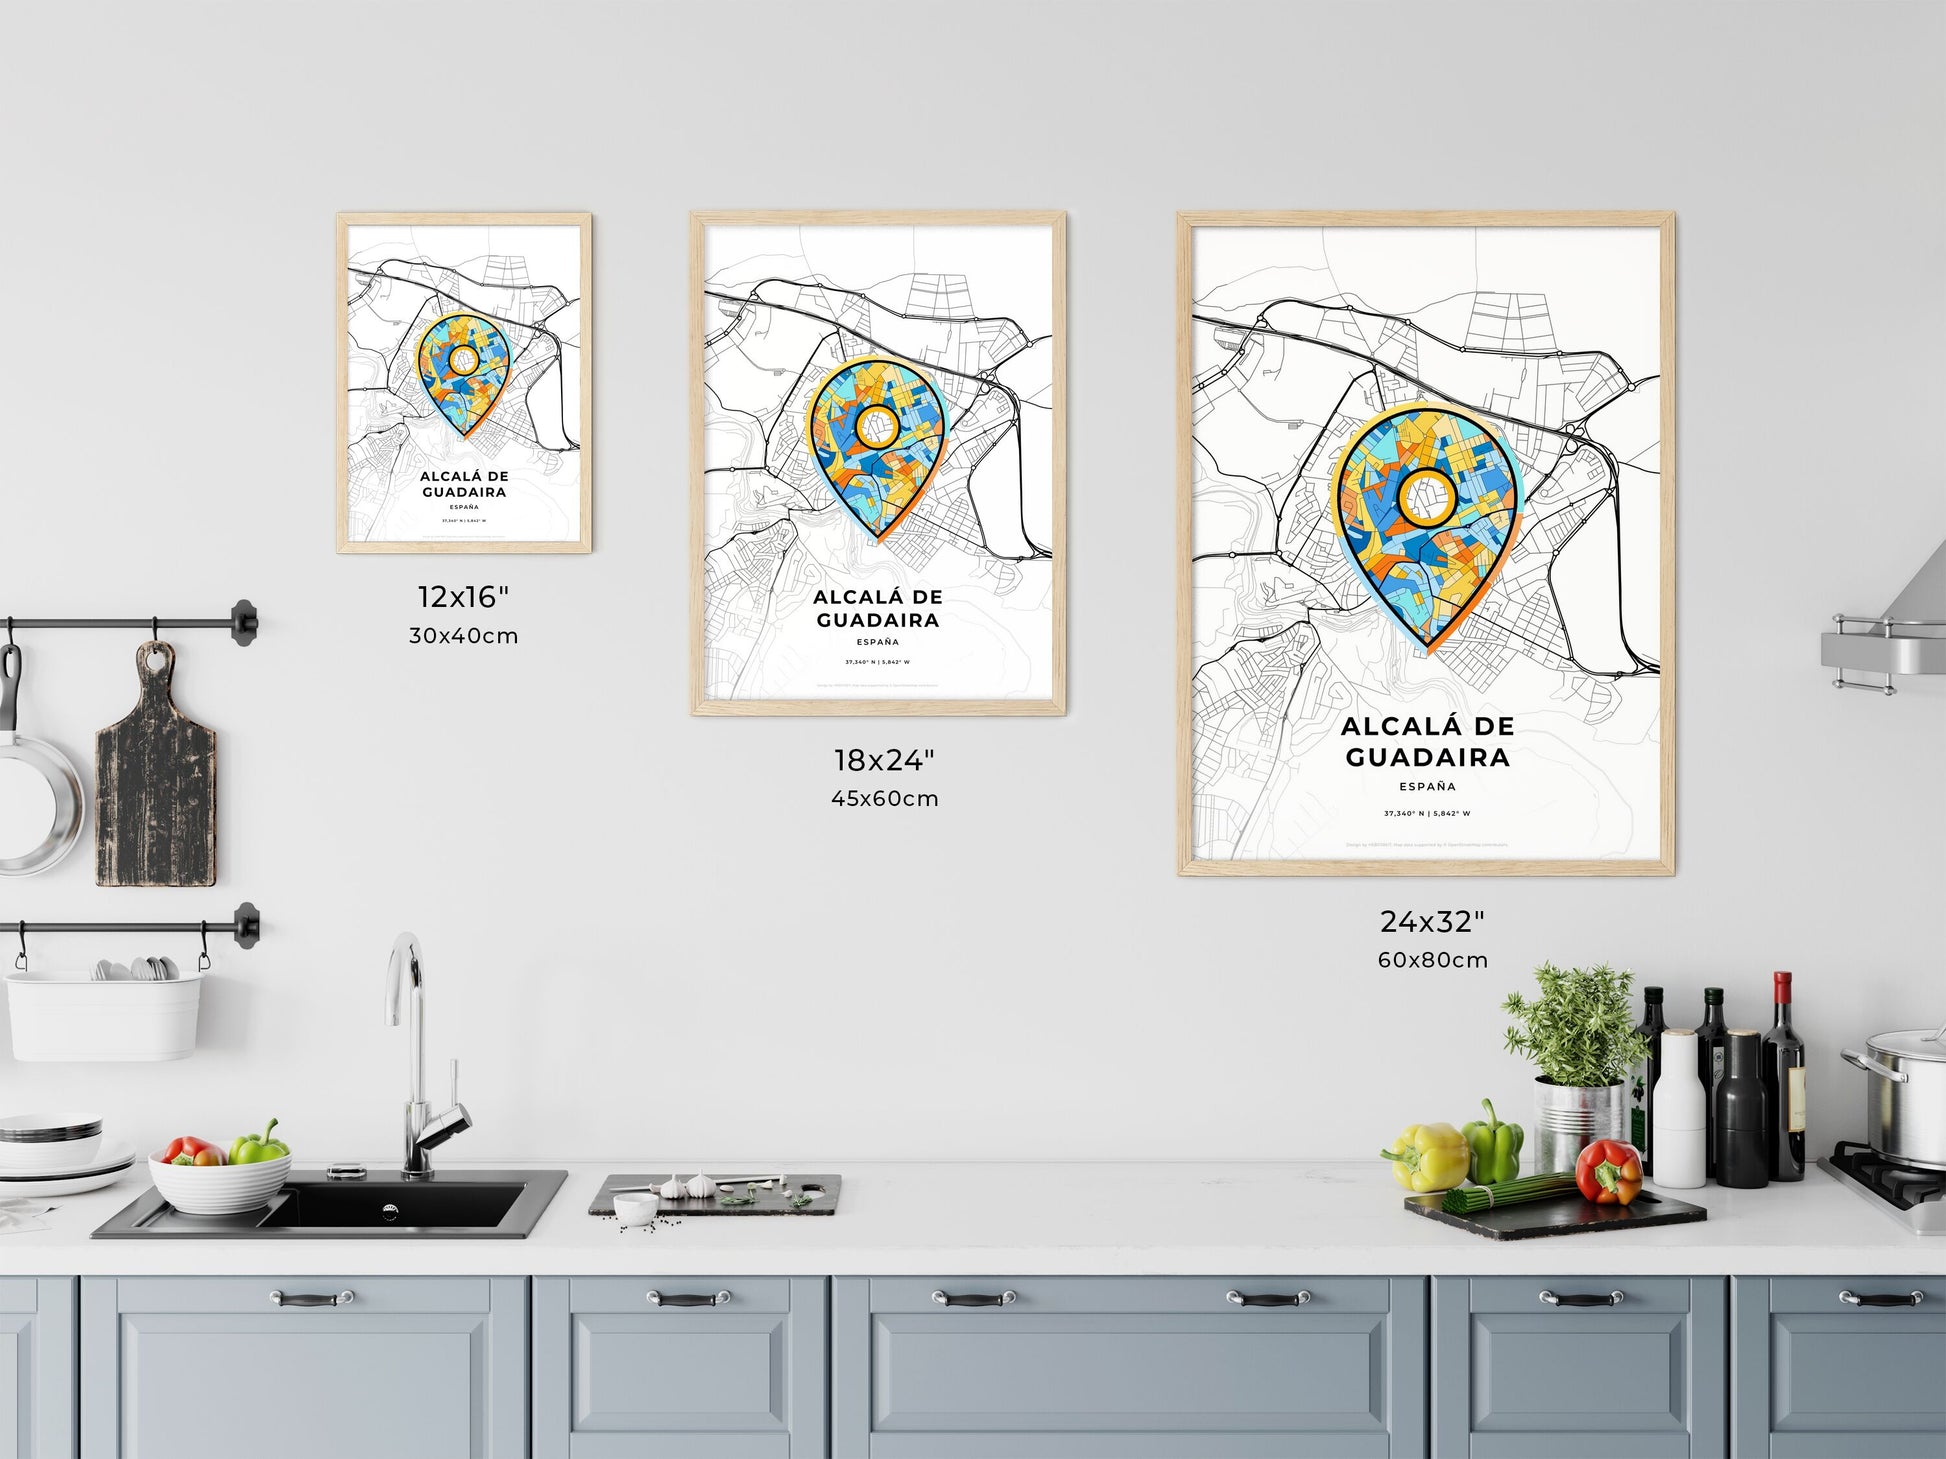 ALCALÁ DE GUADAIRA SPAIN minimal art map with a colorful icon. Where it all began, Couple map gift.